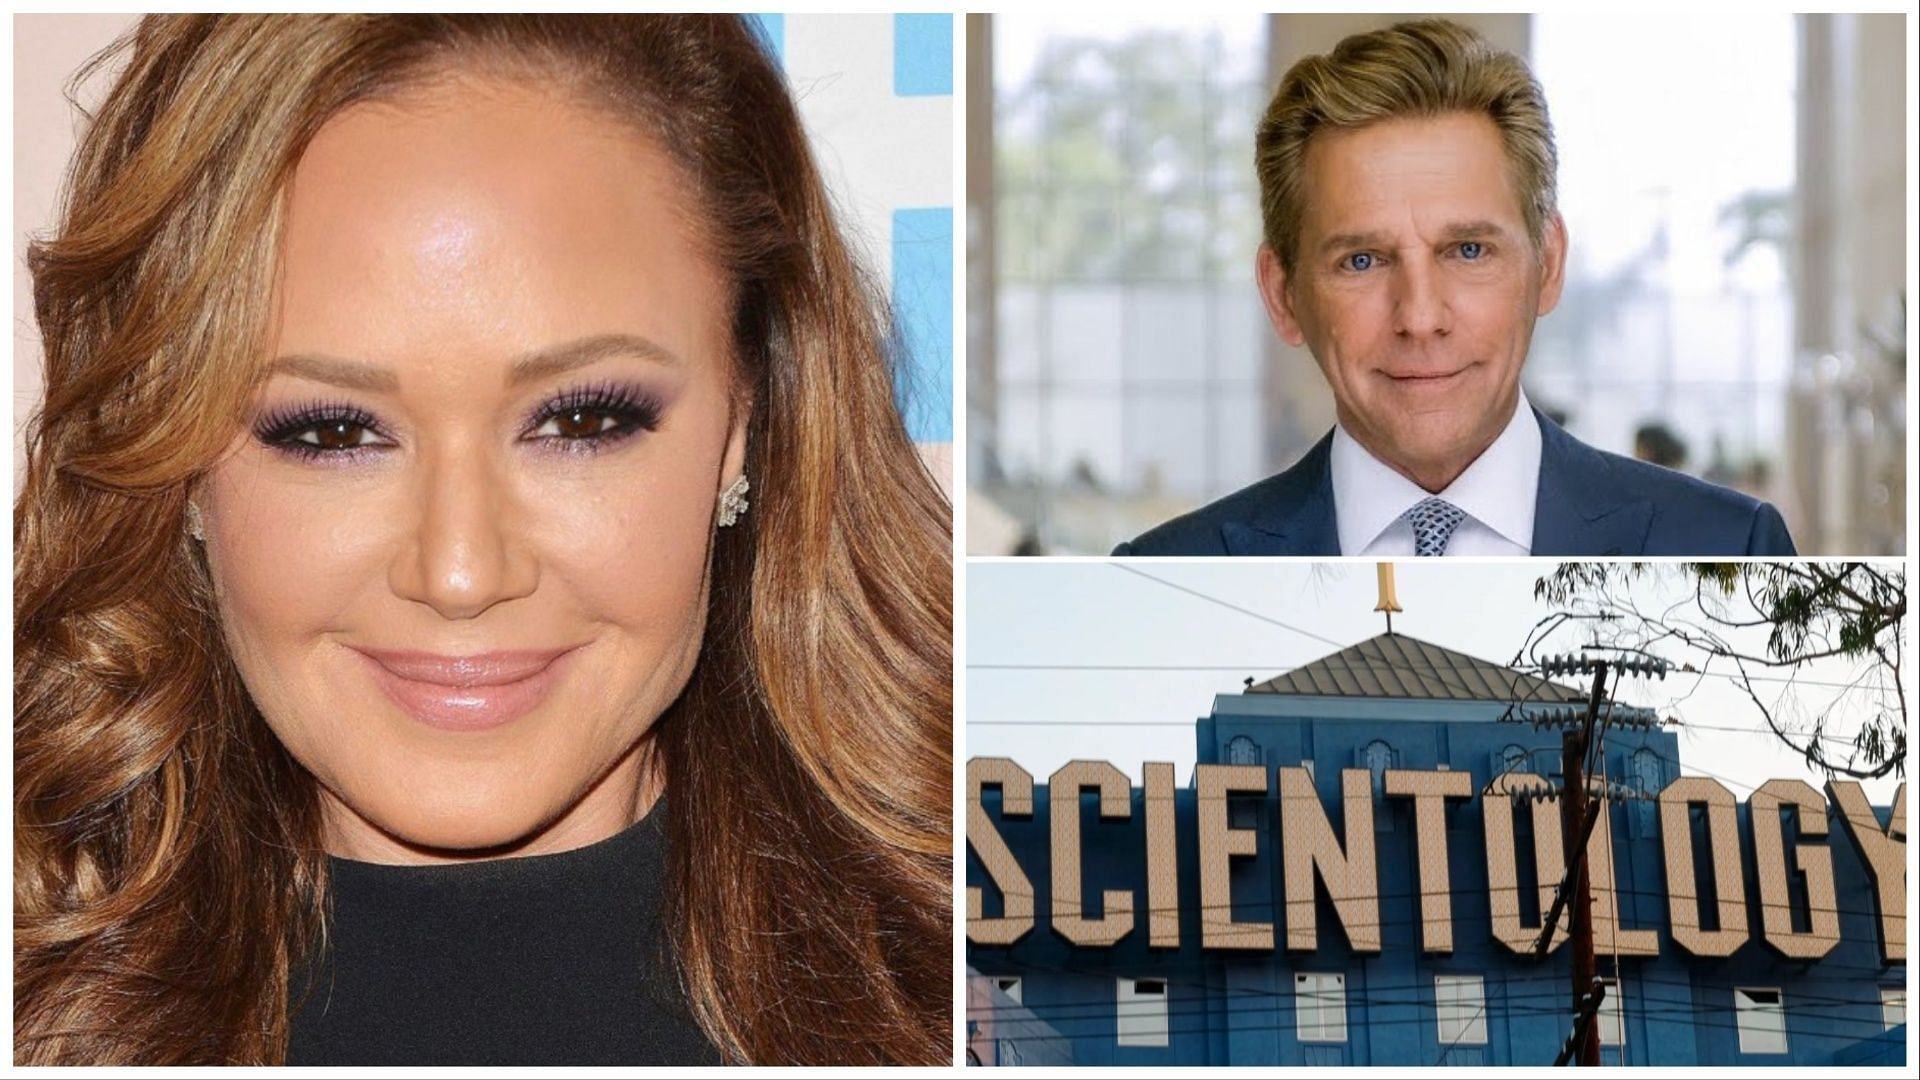 Leah Remini has sued Church of Scientology and it